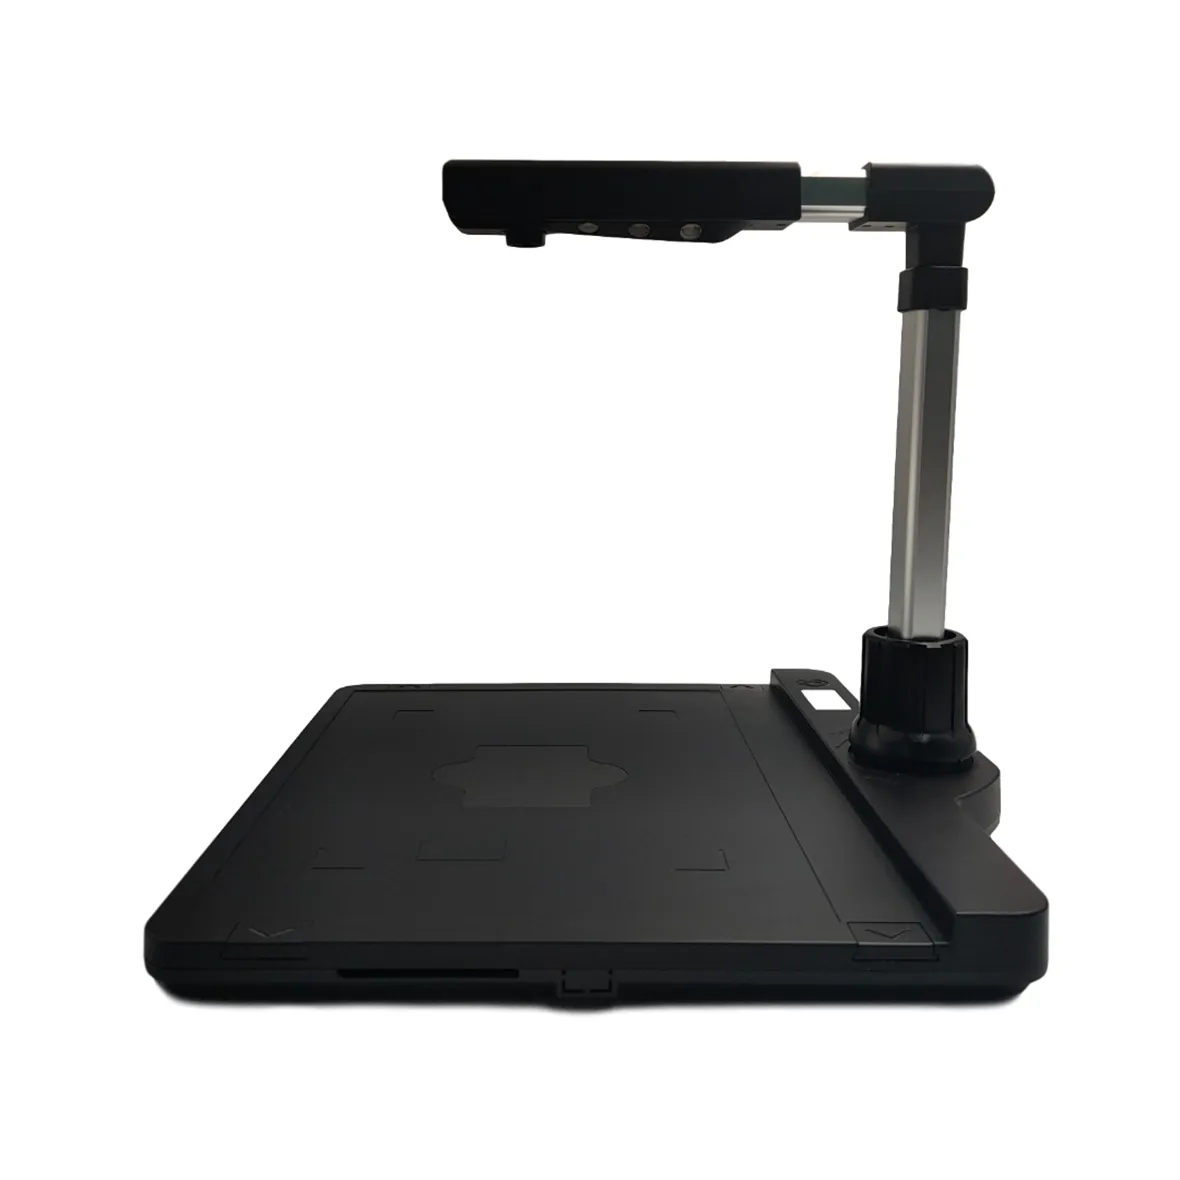 High-definition Portable Booth Scanner Capture Size A3 OCR Multiple Text Recognition Document Camera